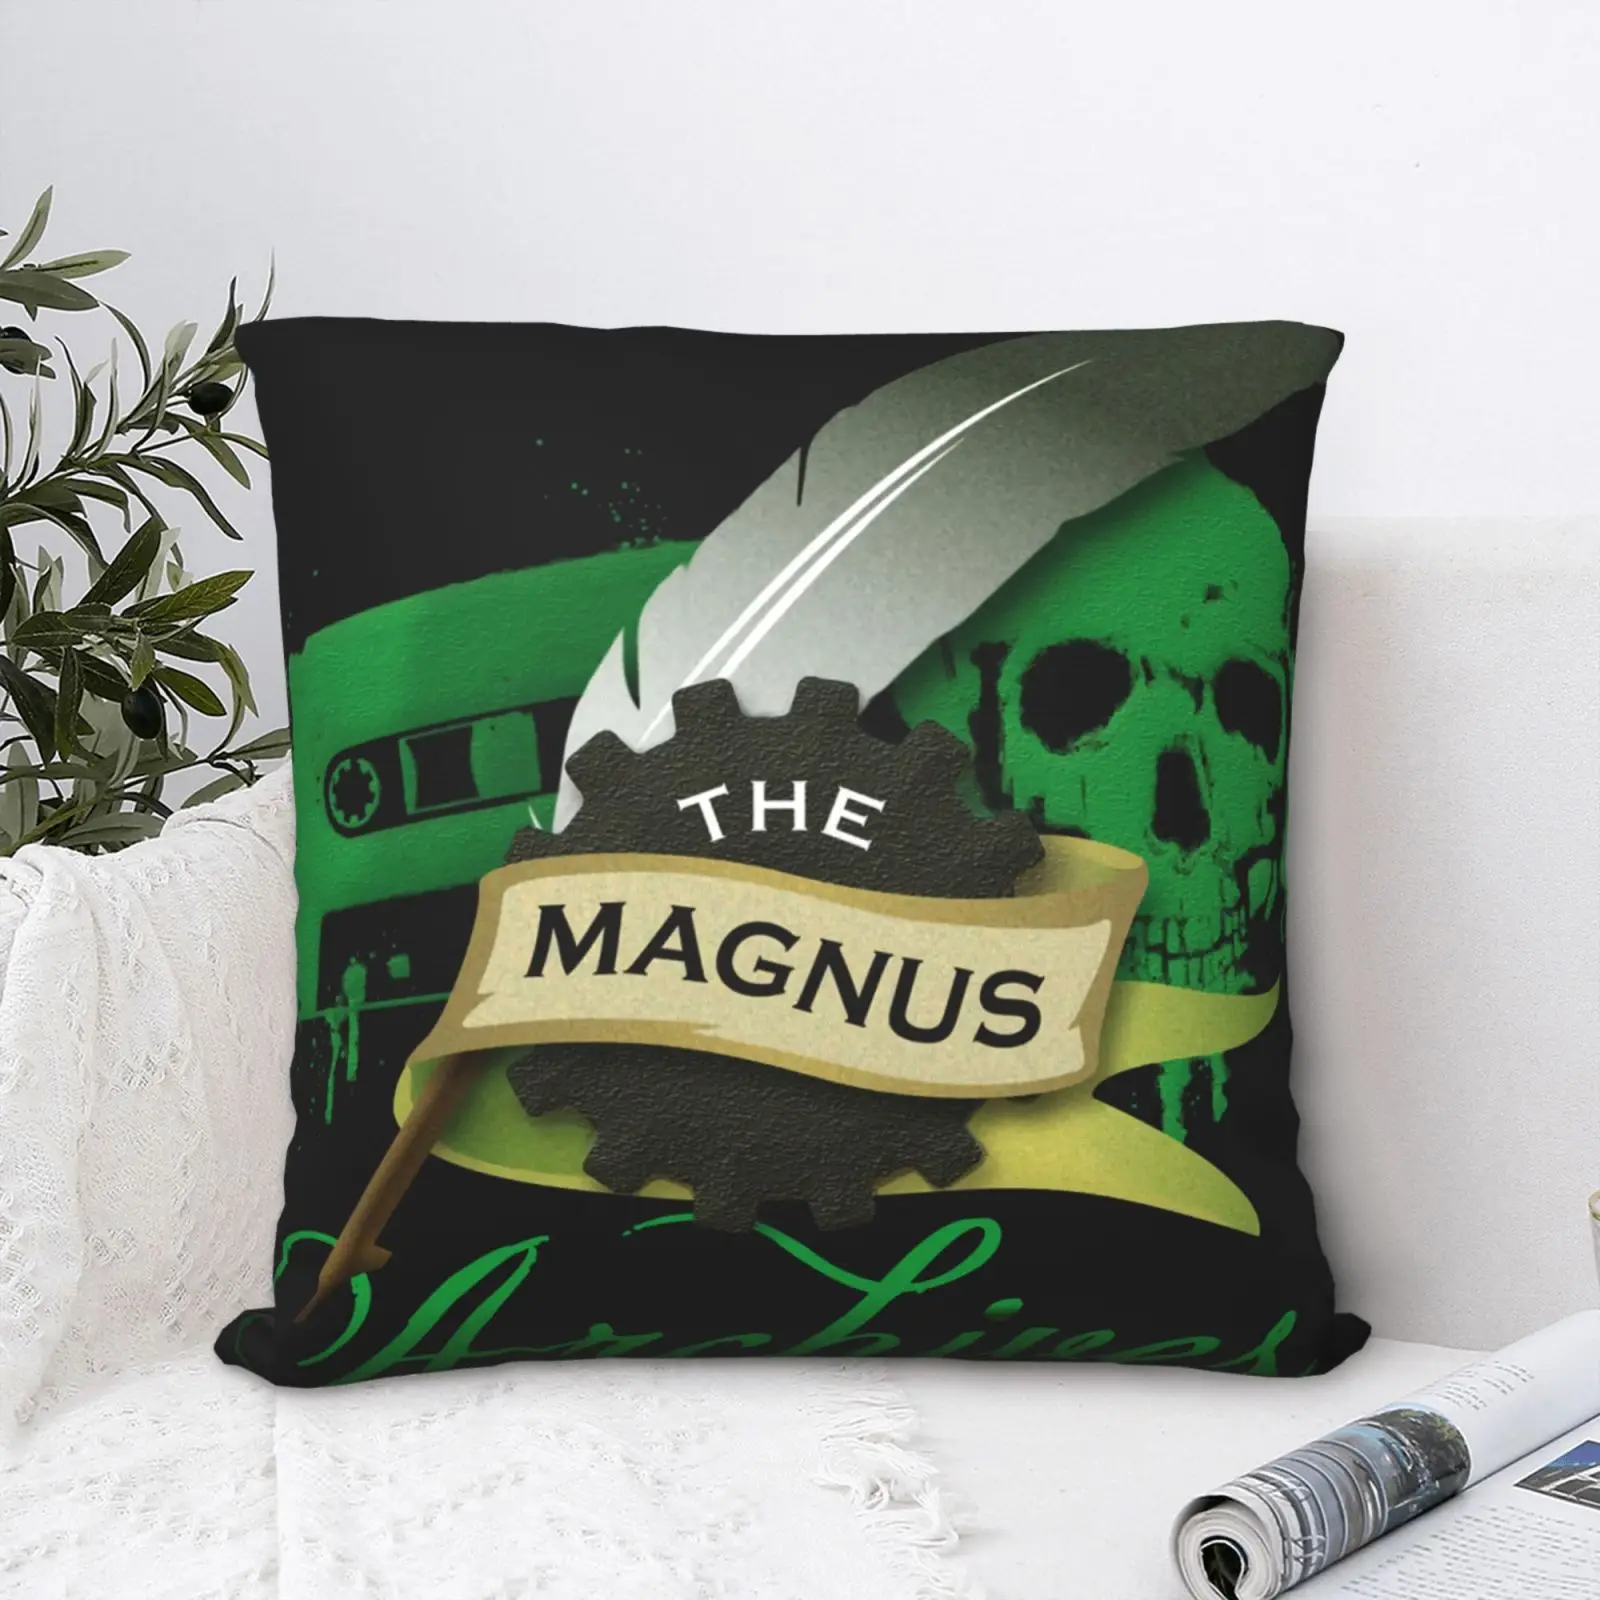 

Limited The Magnus Archives Pillow Case Cushions Cover For Sofa Cushions Cover Kids Pillowcases For Pillows Pillows Decor Home